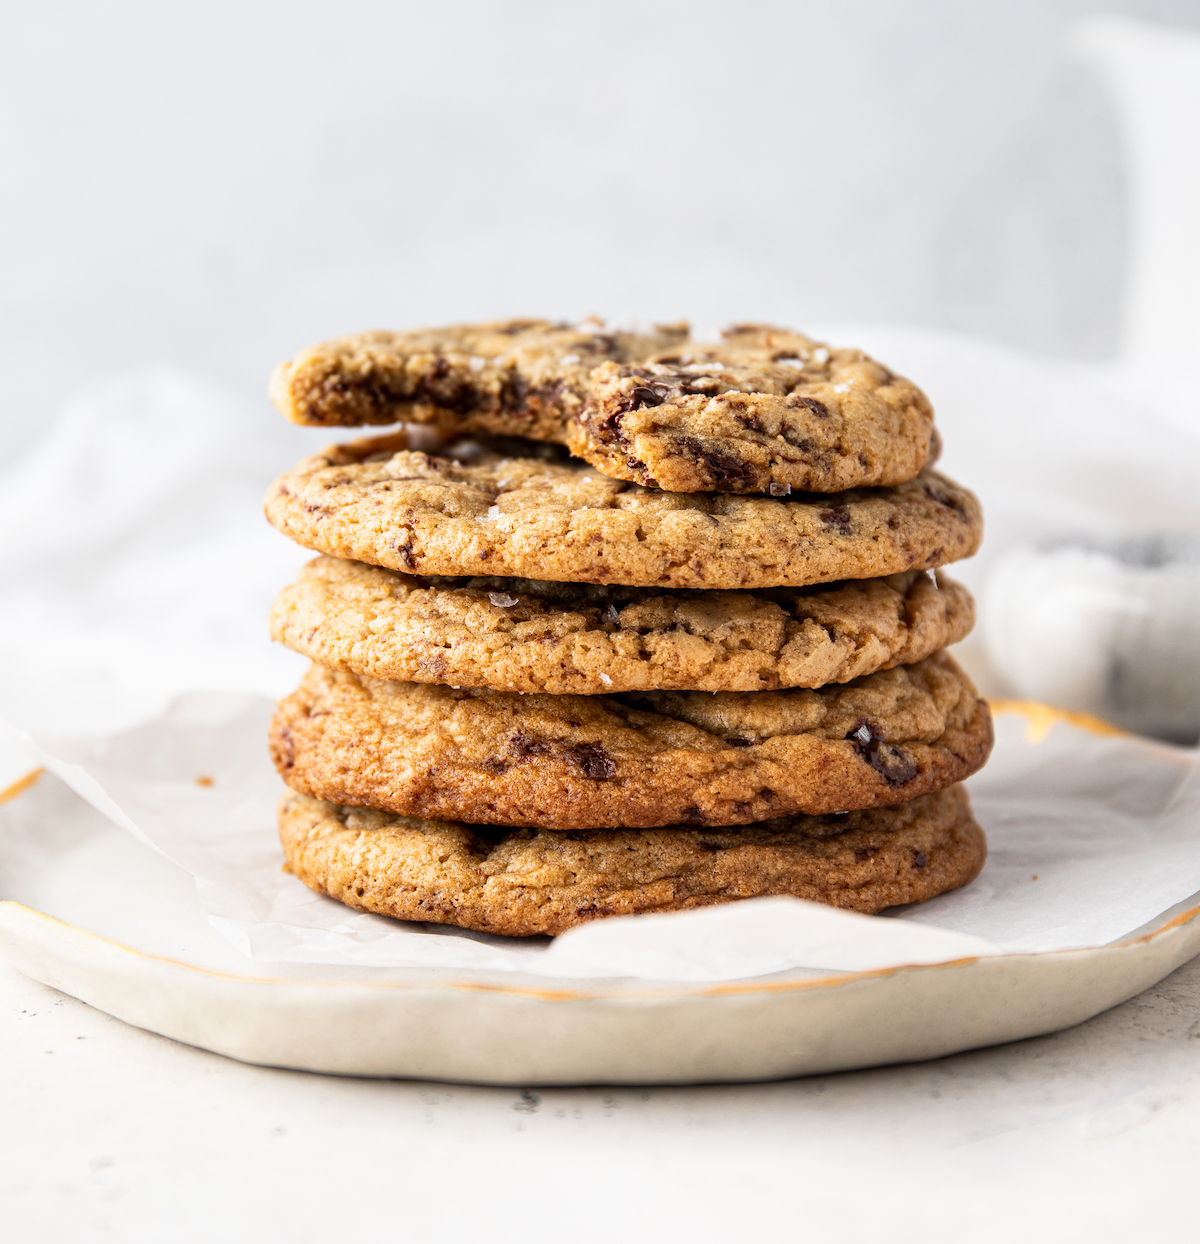 A stack of chocolate chip cookies on a plate with a white background.